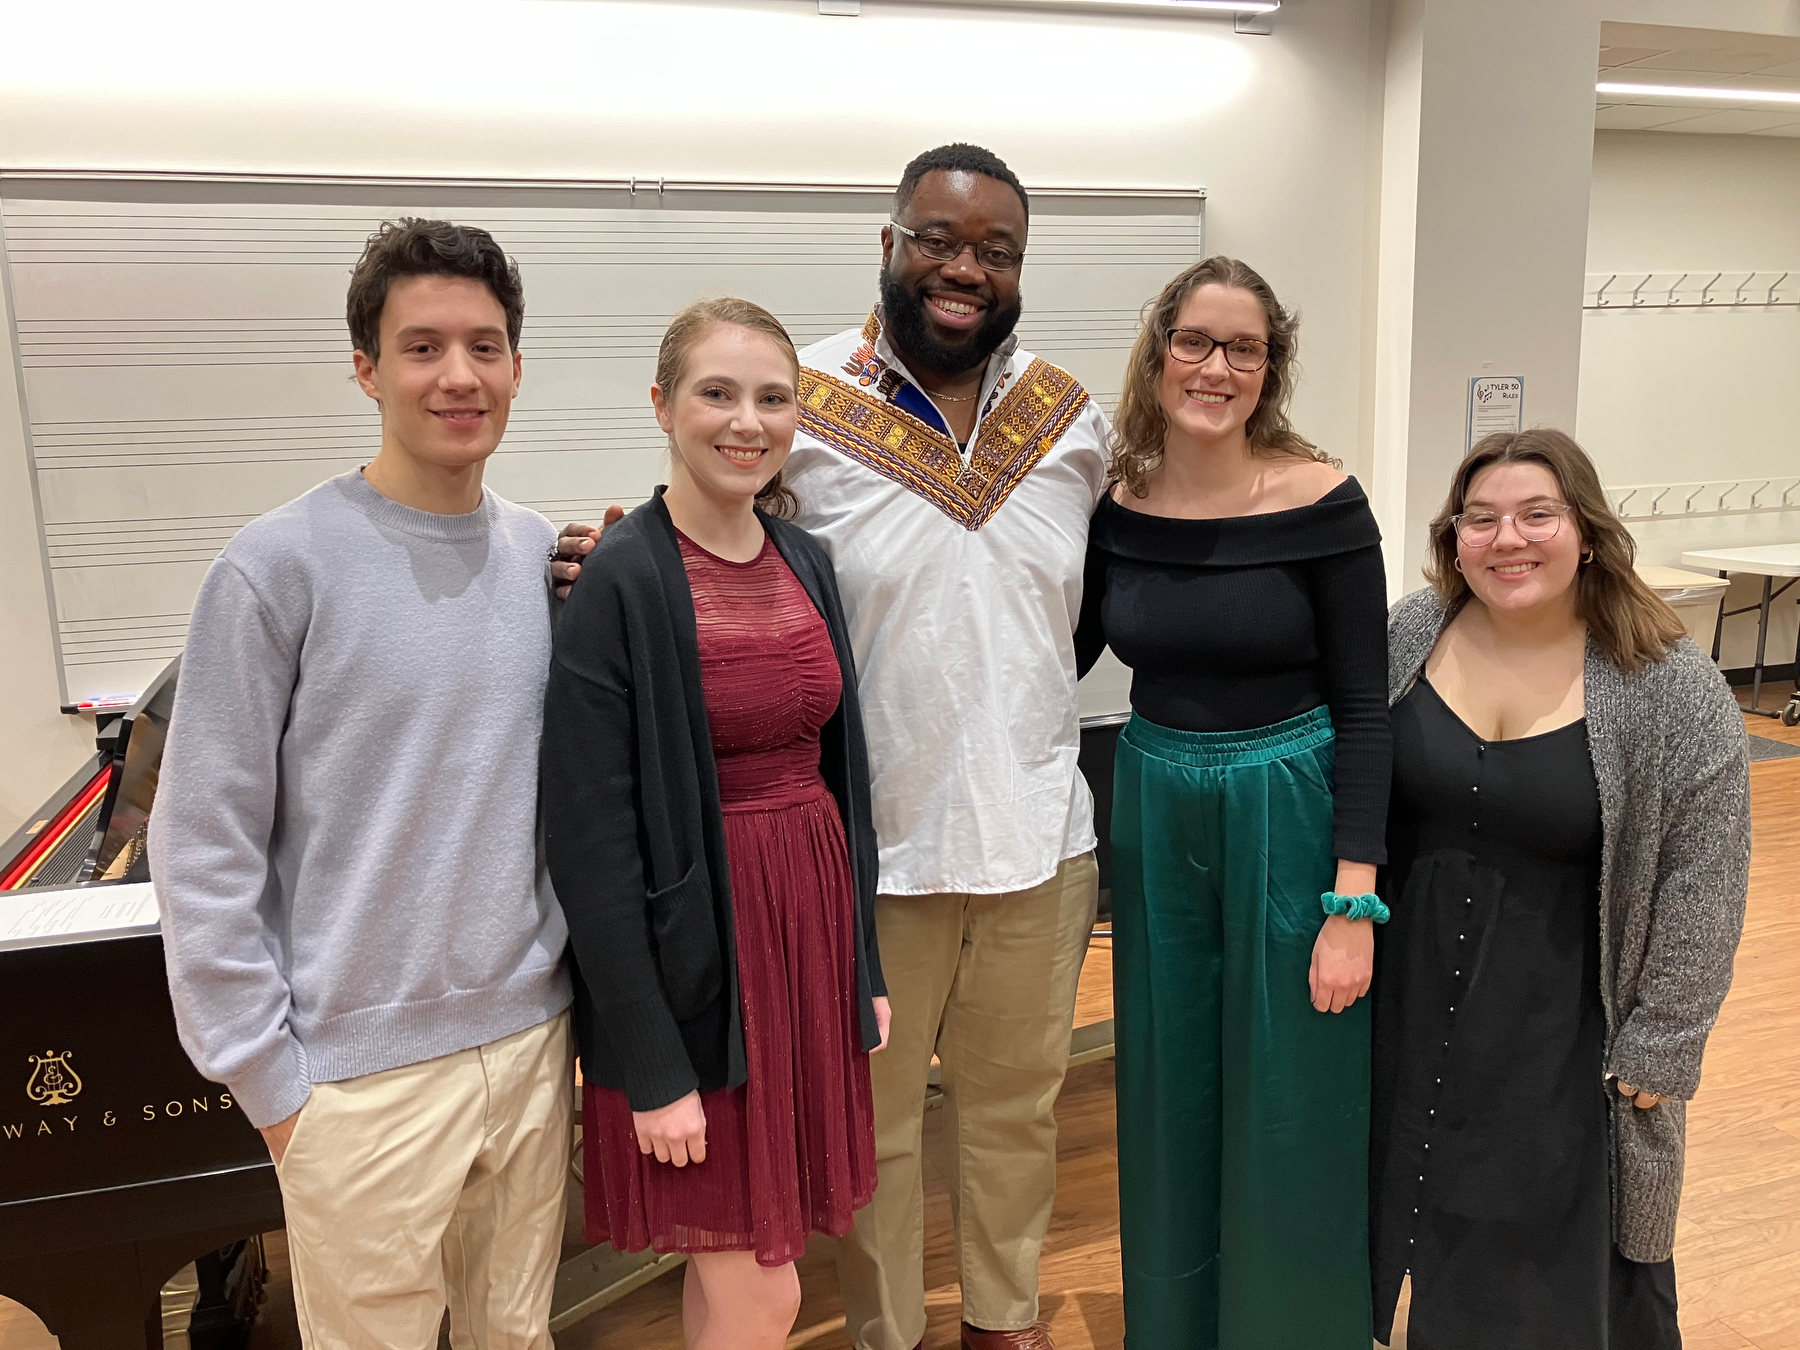 Tamar Greene (center), a 2009 SUNY Oswego alumnus who appears on Broadway as George Washington in the mega-hit musical “Hamilton,” provided feedback to student vocalists in a master class on Tuesday, Nov. 29. The singers he gave praise pointers to are, from left. Hunter Caiazzo, Mackenzie Shields, Molly DeMarco and Olivia Cibella.